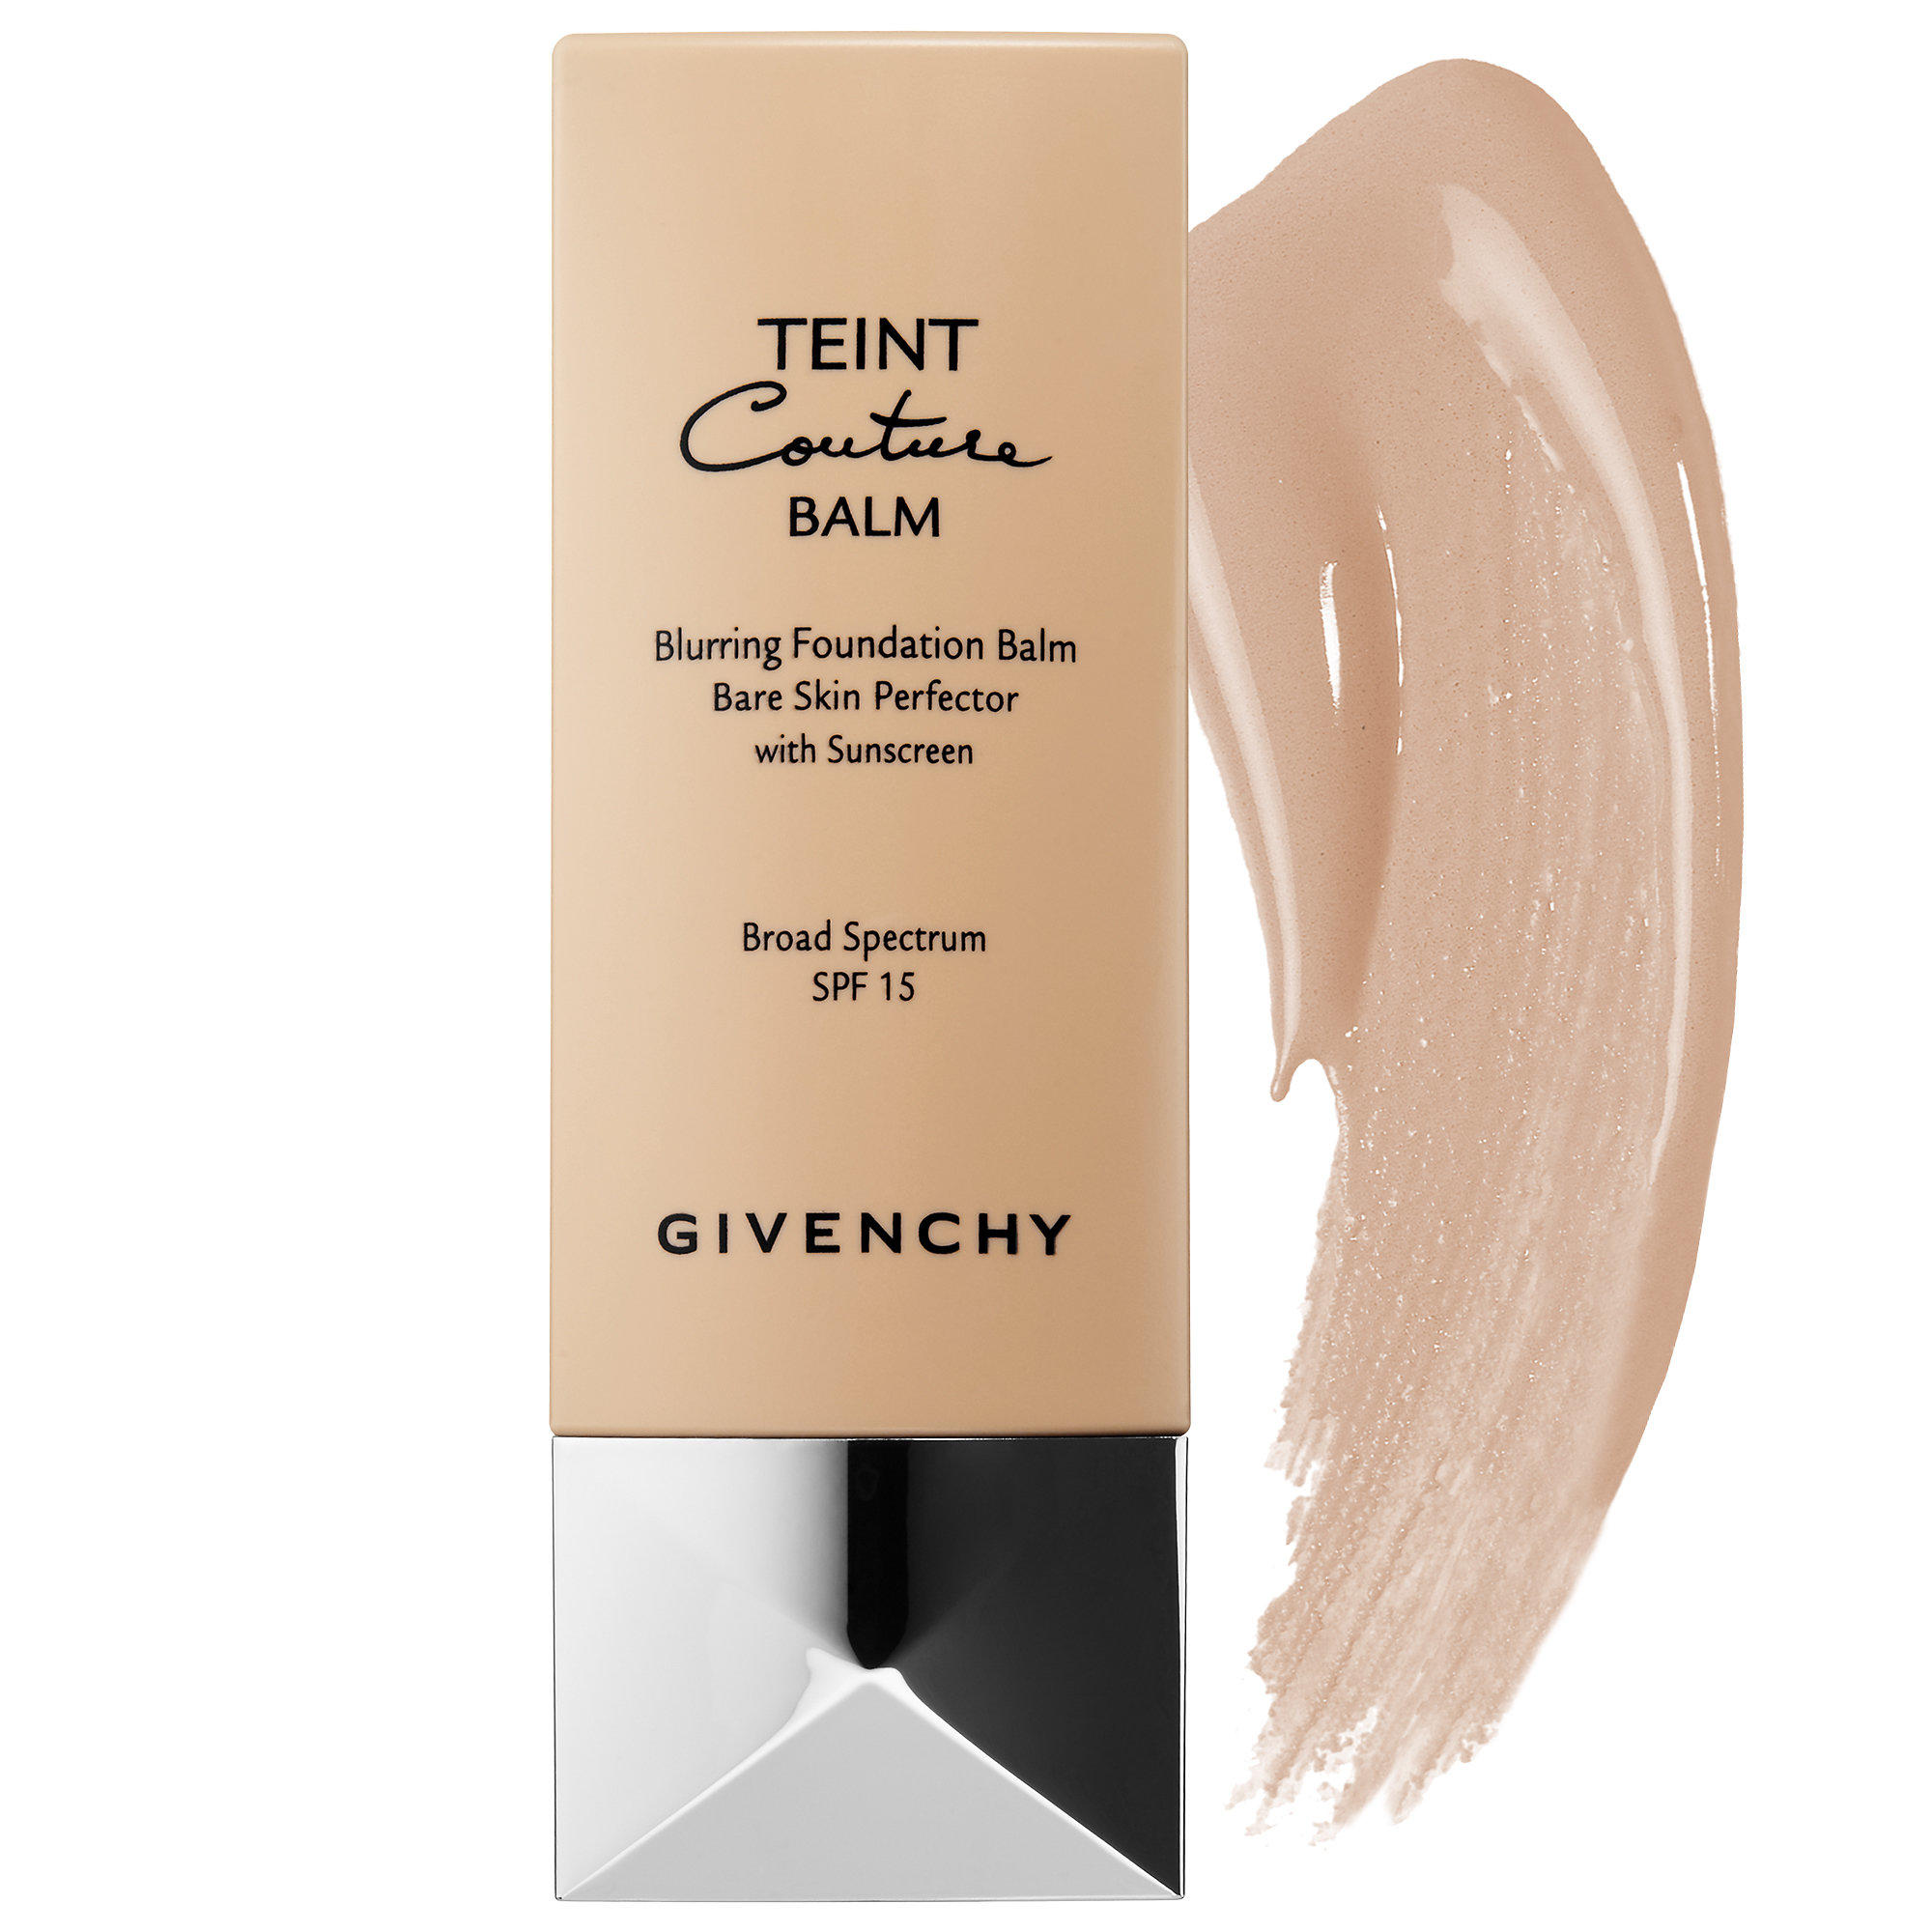 Givenchy Teint Couture Balm Blurring Foundation 5 Nude Honey